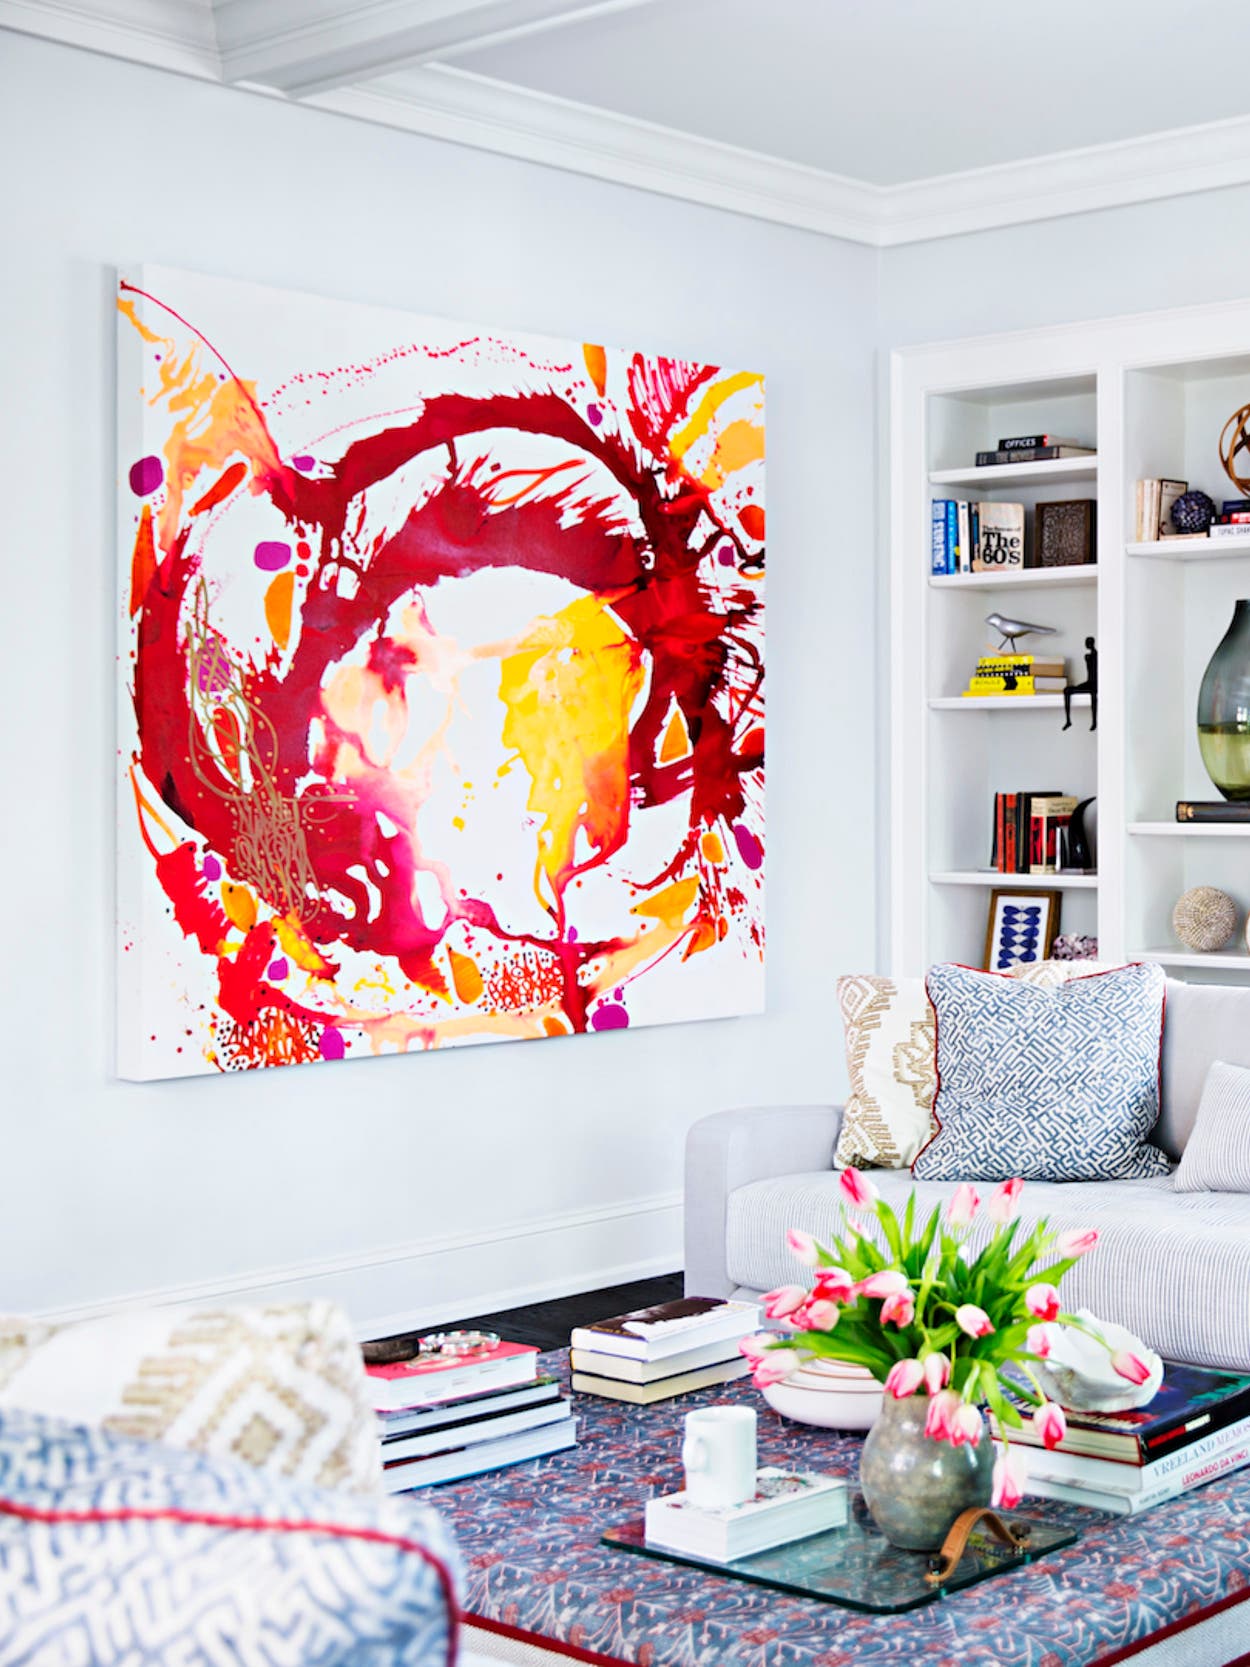 A Colorful Hamptons House Filled With Pattern and Texture